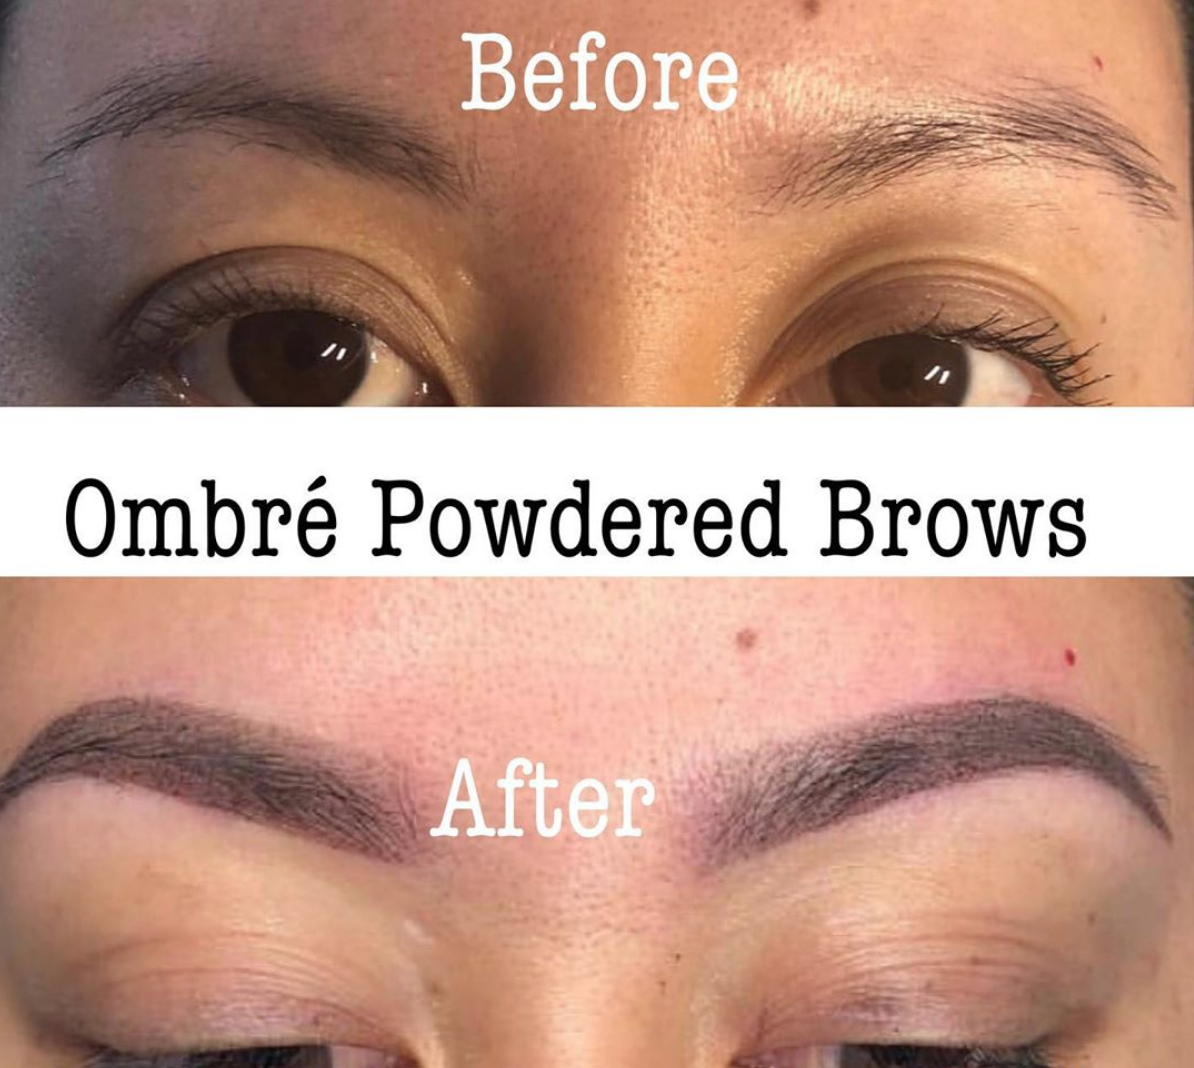 Ombré Powdered Brows